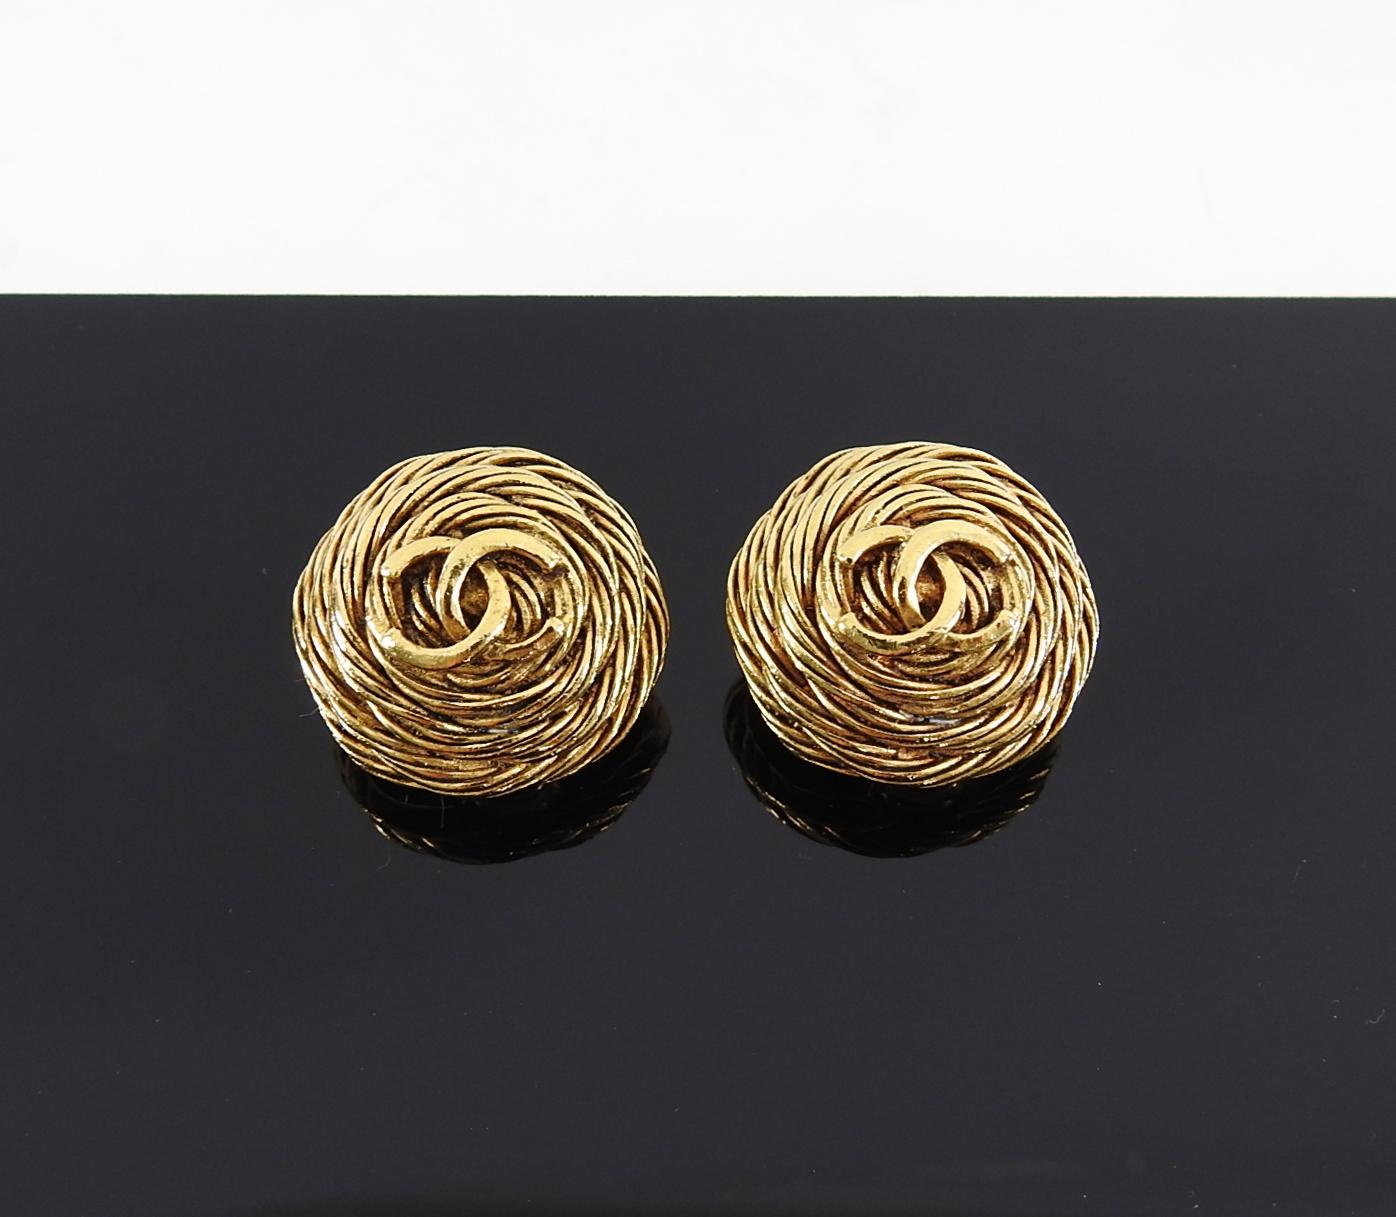 Chanel Vintage 1994 Gold CC Round Clip Earrings.  From the 94A collection, clip on, goldtone metal with CC logo, and domed profile.  Excellent condition. Measures 1-⅛” across.